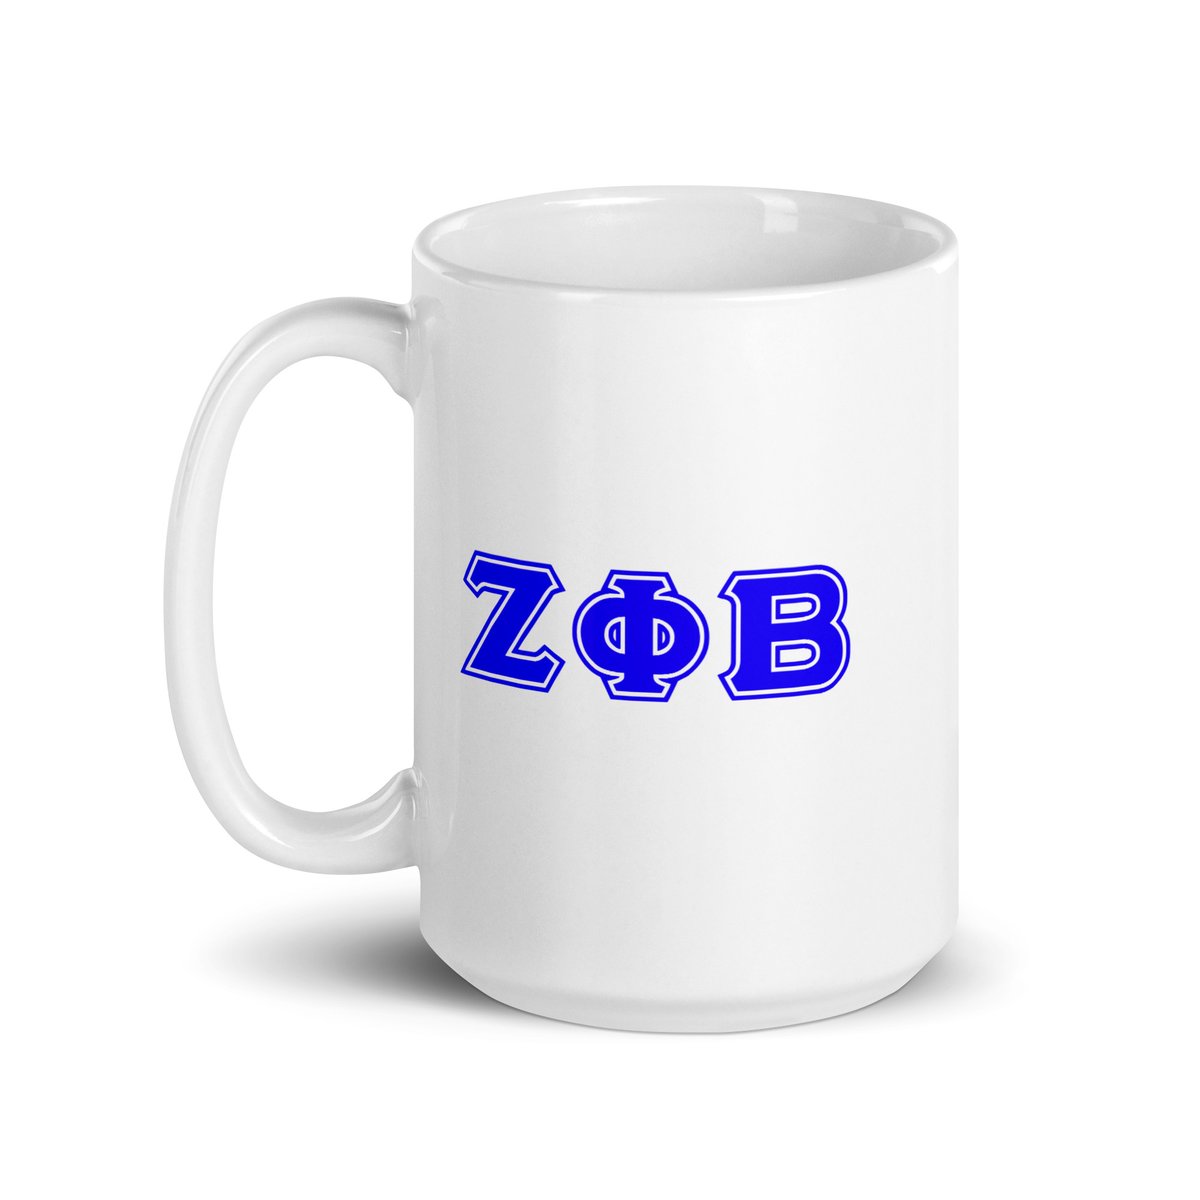 Our new custom line jacket mugs are on sale! Get 25% off with code: Cyber25 . Hurry! Sale ends Monday night! 

Zeta Phi Beta Personalized White Glossy Mug - Two Sizes Available https://t.co/5tRxwgmbfY via @Etsy 
#zetaphibeta #zphib #sorors #divine9  #CyberMonday 